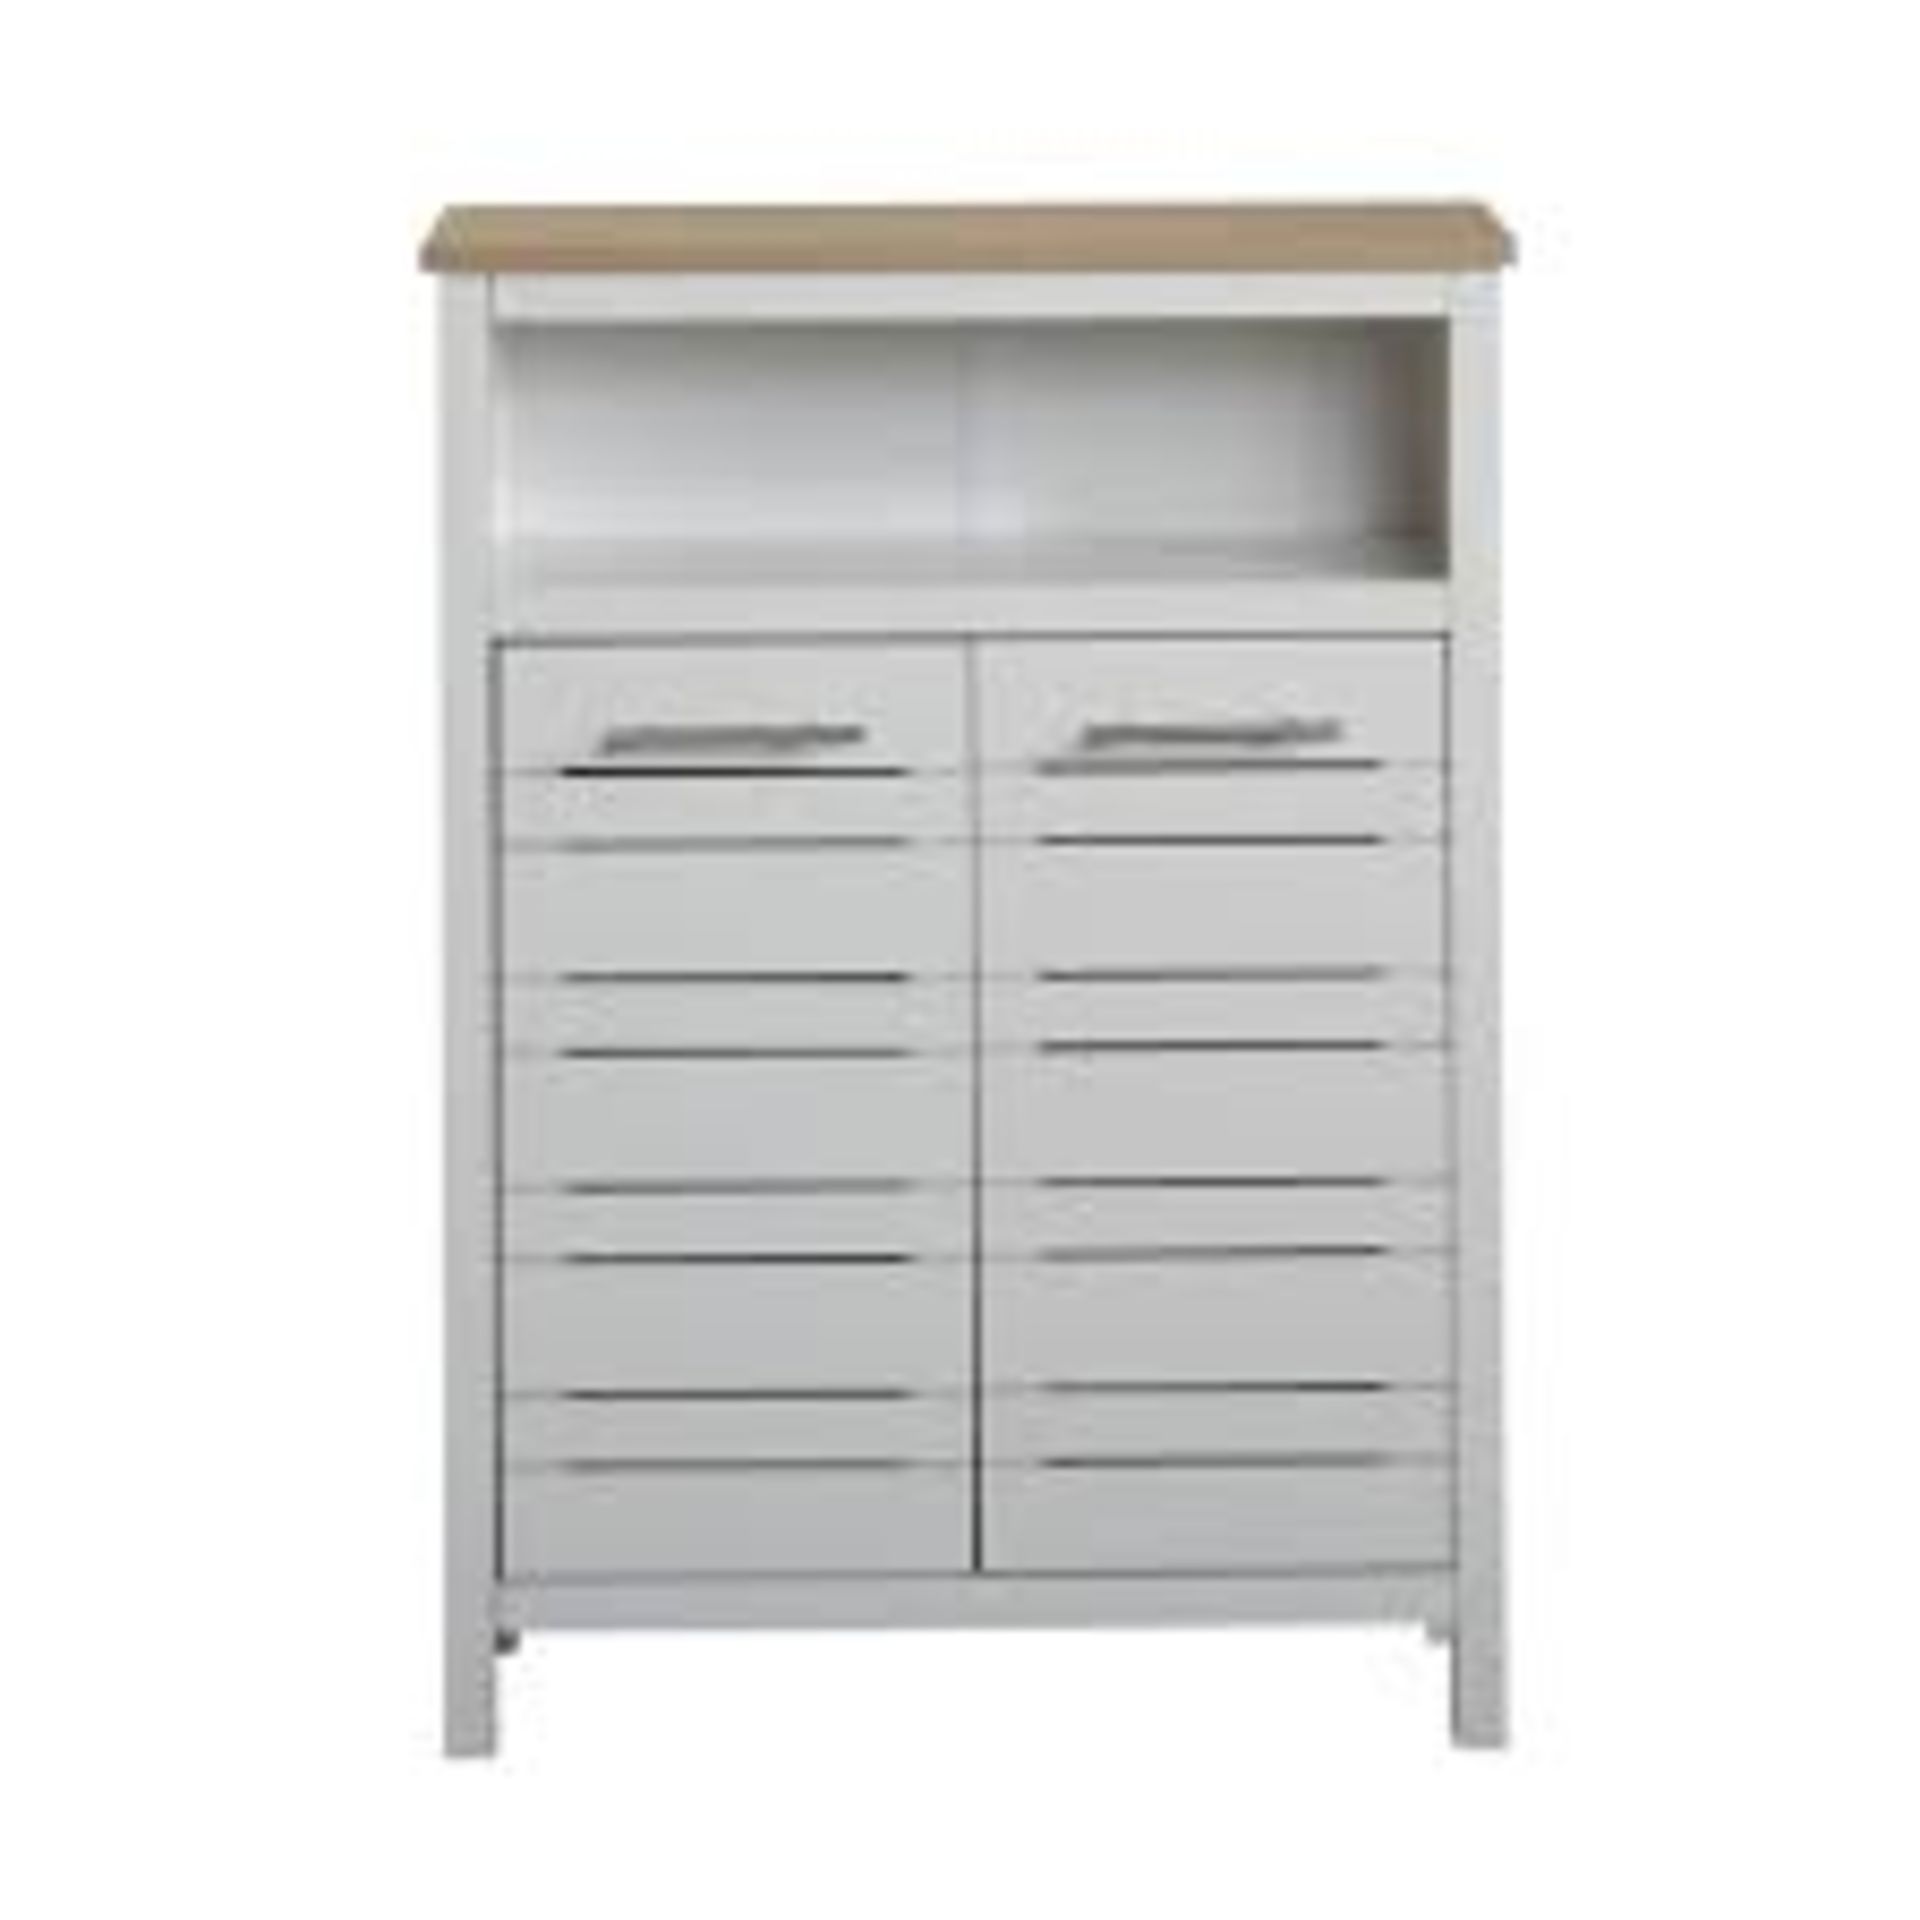 4 x NEW BOXED Hertford Two-Tone White Double Door Storage Unit. The Two-Toned Bathroom Console - Image 4 of 4